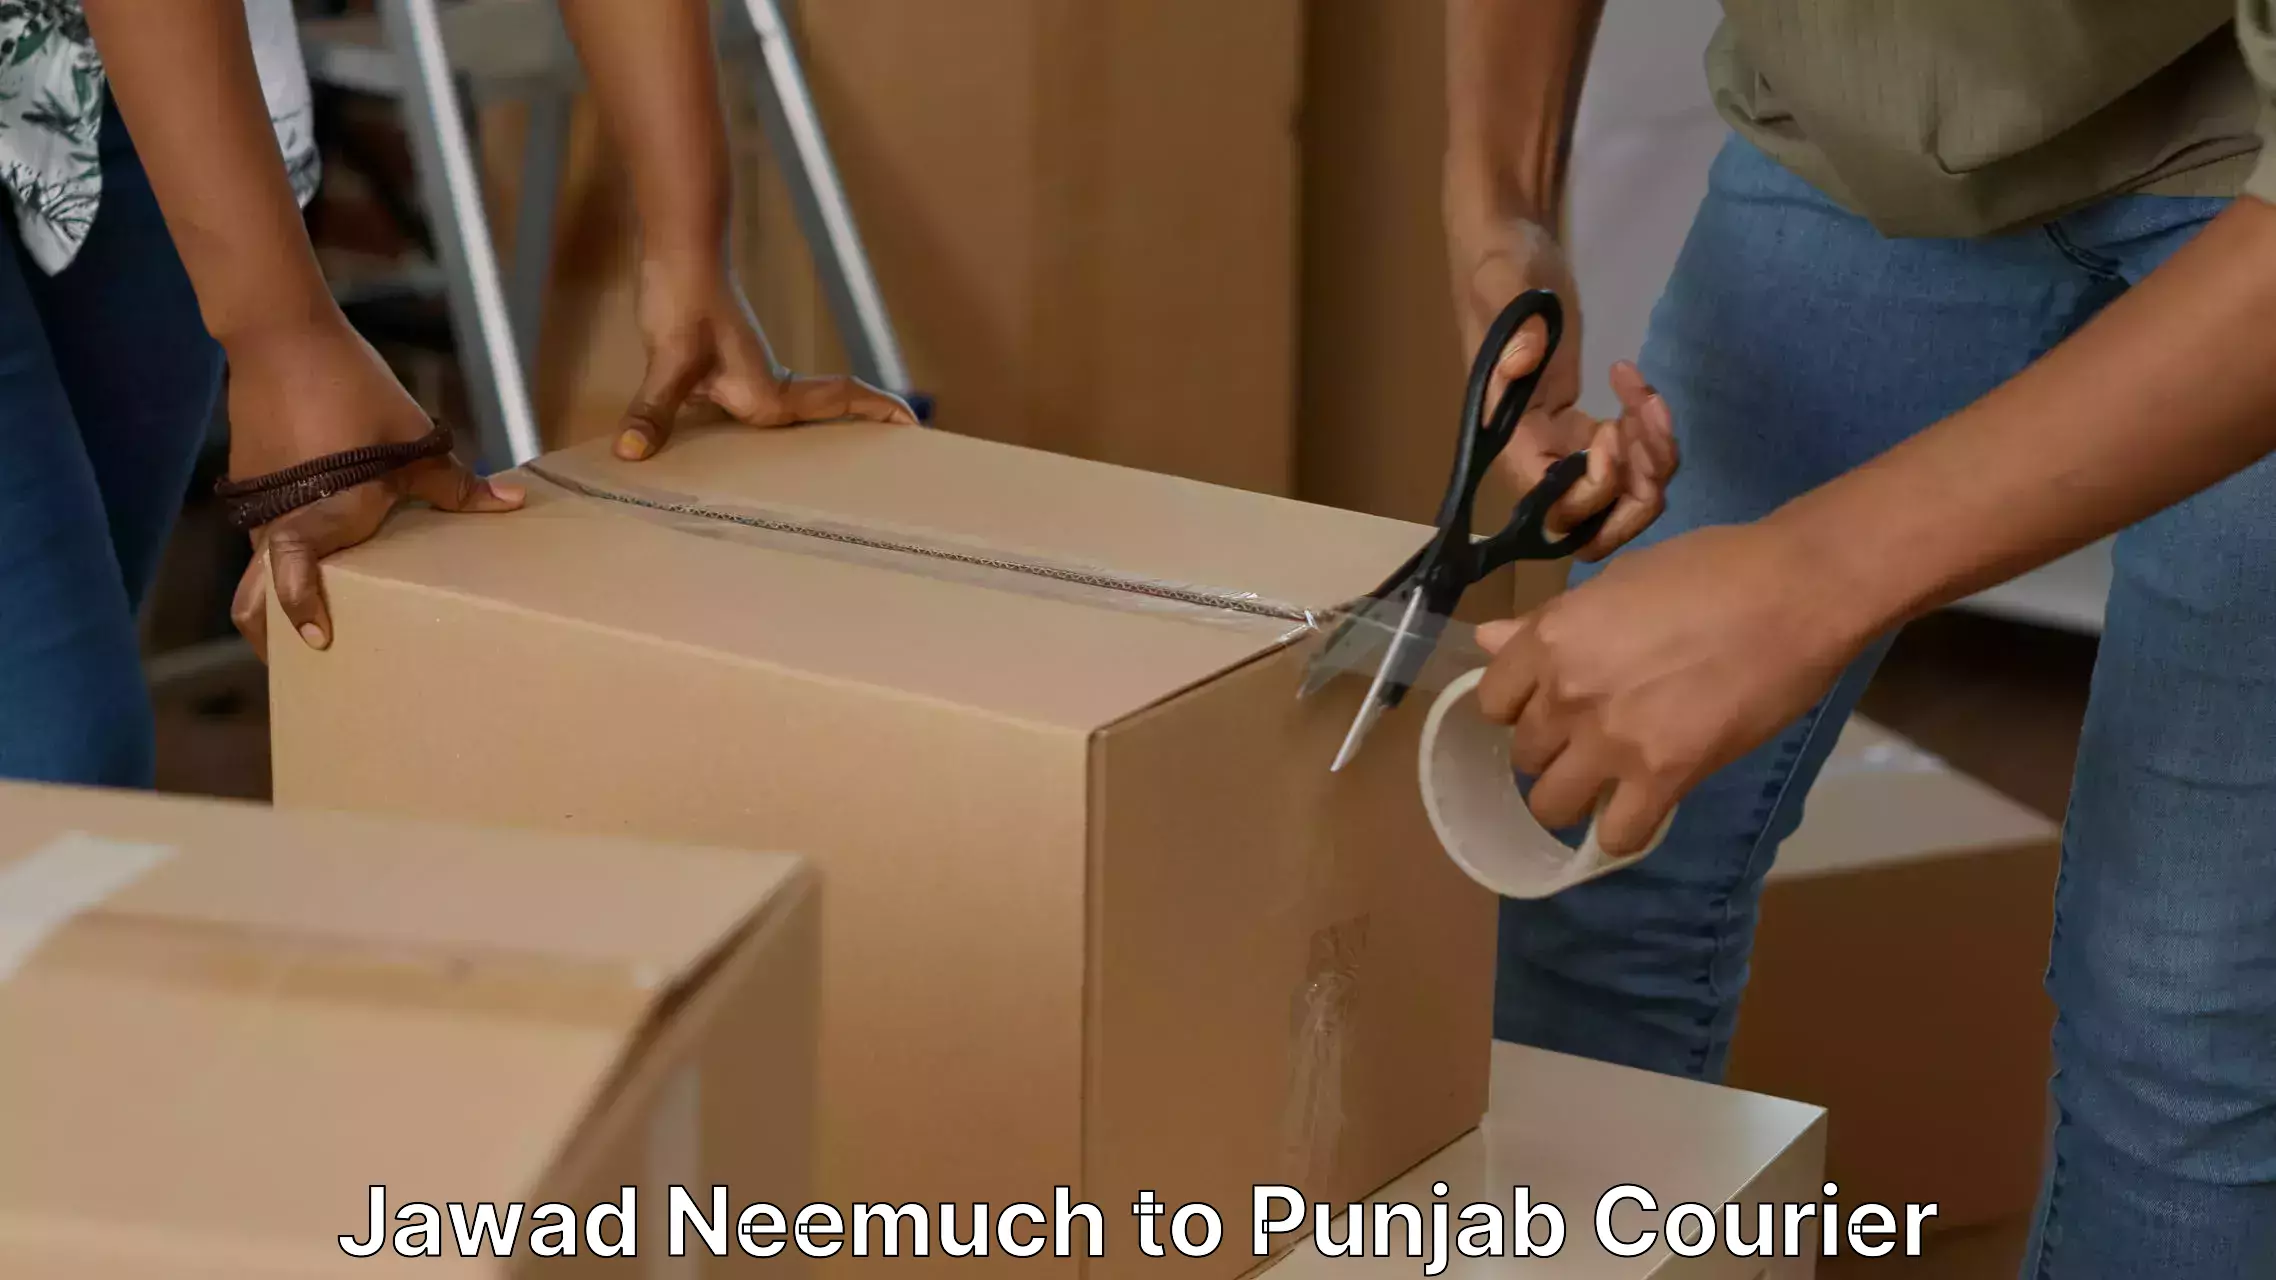 Quality relocation assistance Jawad Neemuch to Fatehgarh Sahib